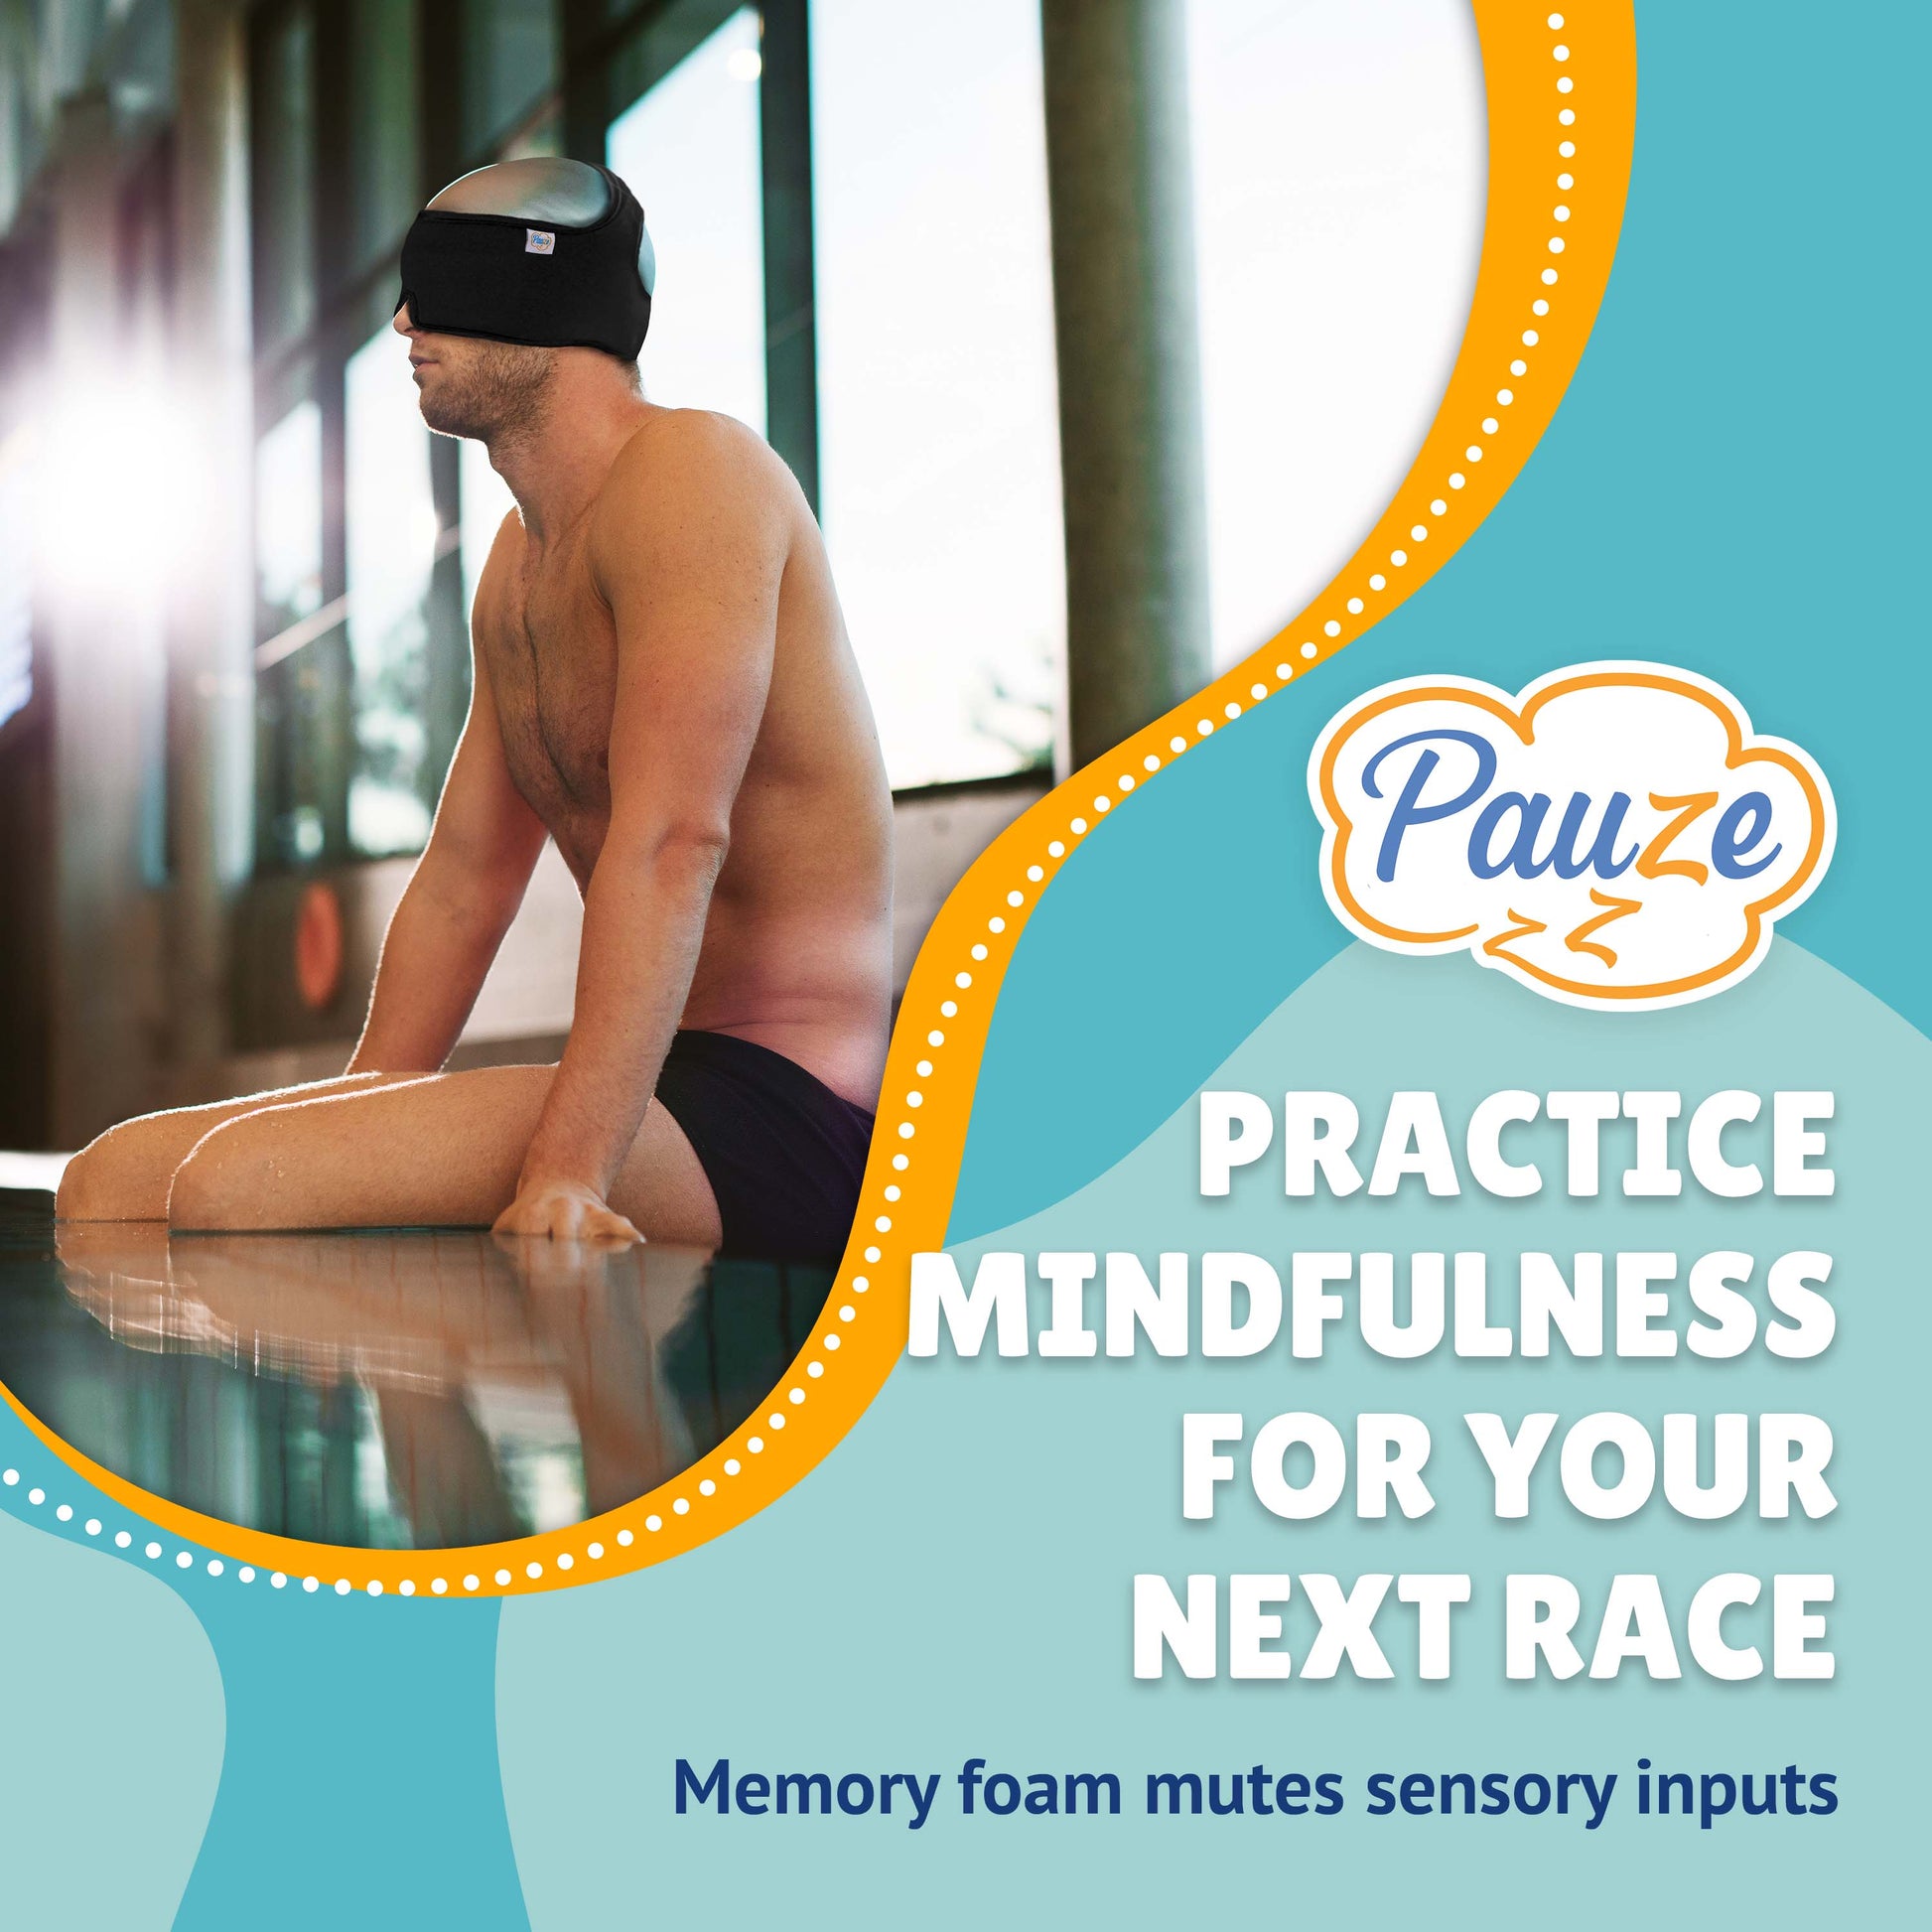 Man sits on edge of pool with Pauze mask on. Graphic says Practice mindfulness for your next race. Memory foam mutes sensory inputs